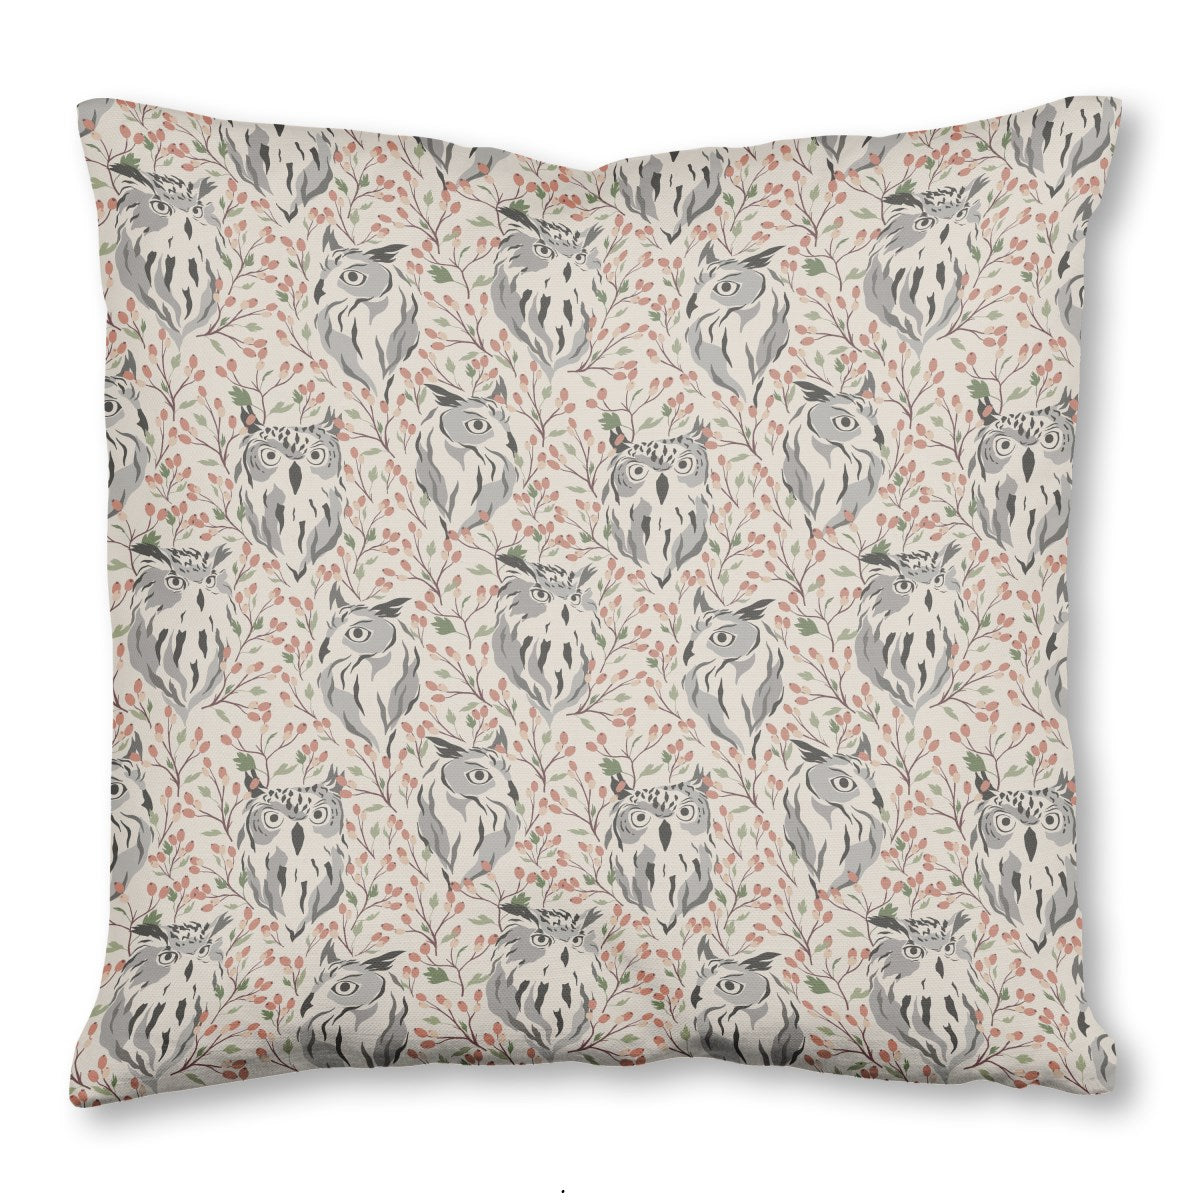 Perched Owl Throw Pillow